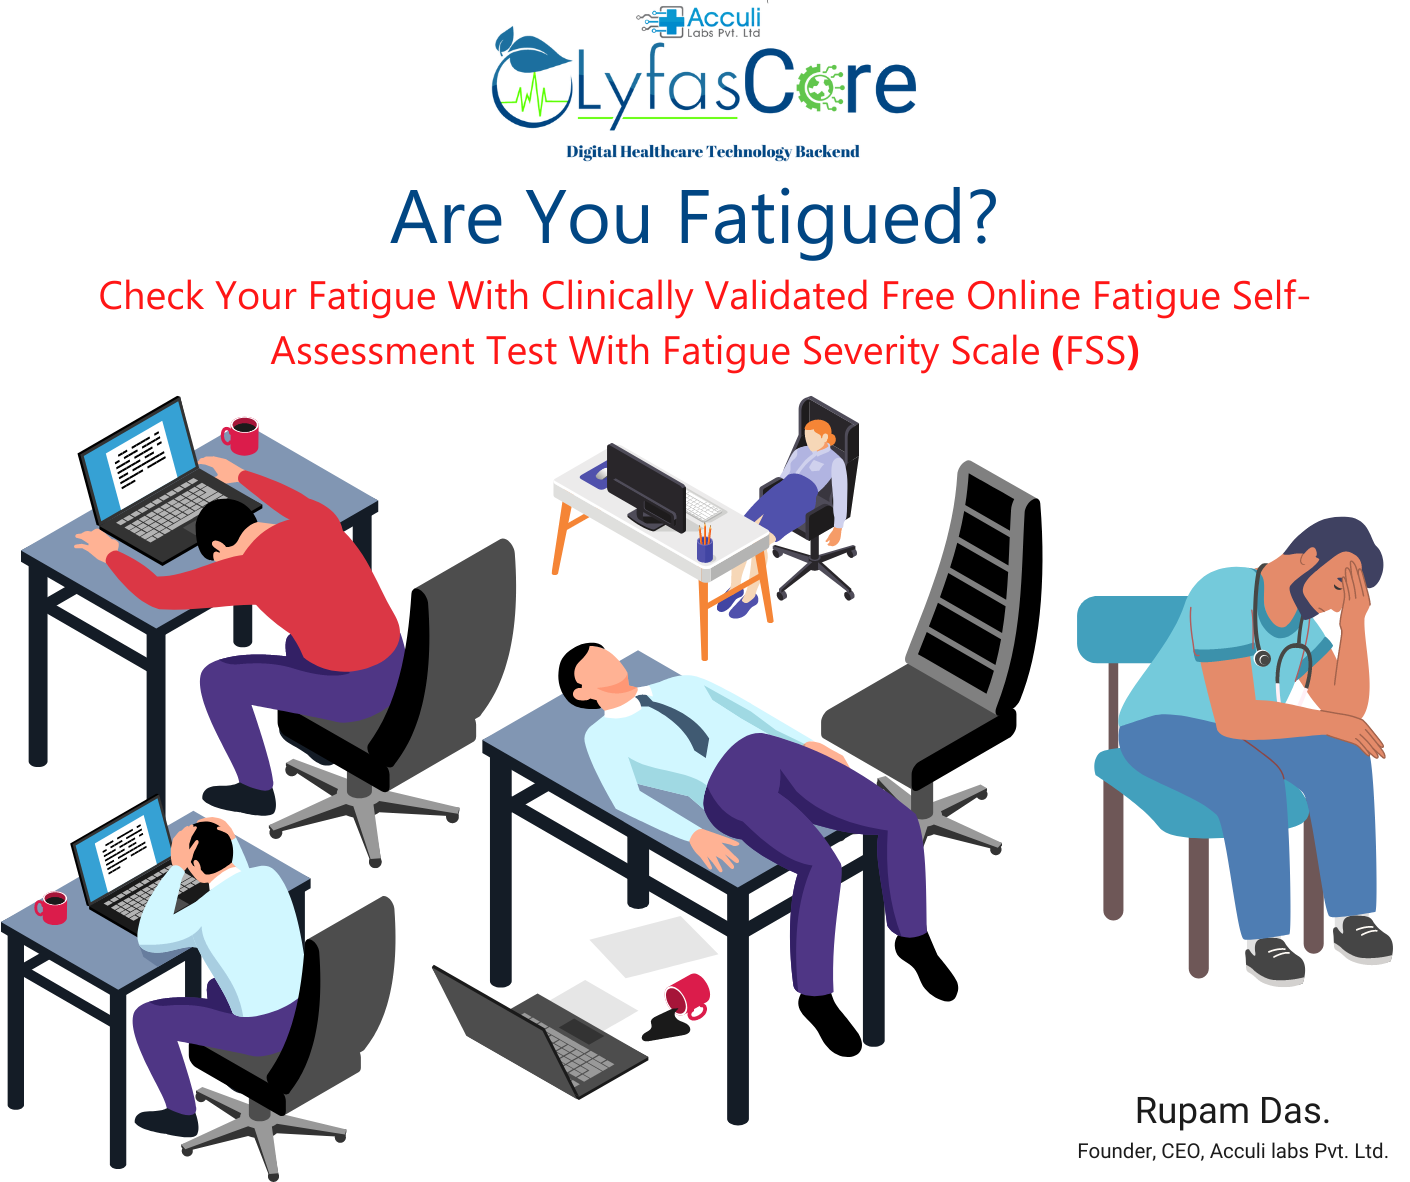 Check Your Fatigue With Clinically Validated Free Online Fatigue Self-Assessment Test With Fatigue Severity Scale (FSS) Lyfas Core test by Rupam Das Acculi Lyfas